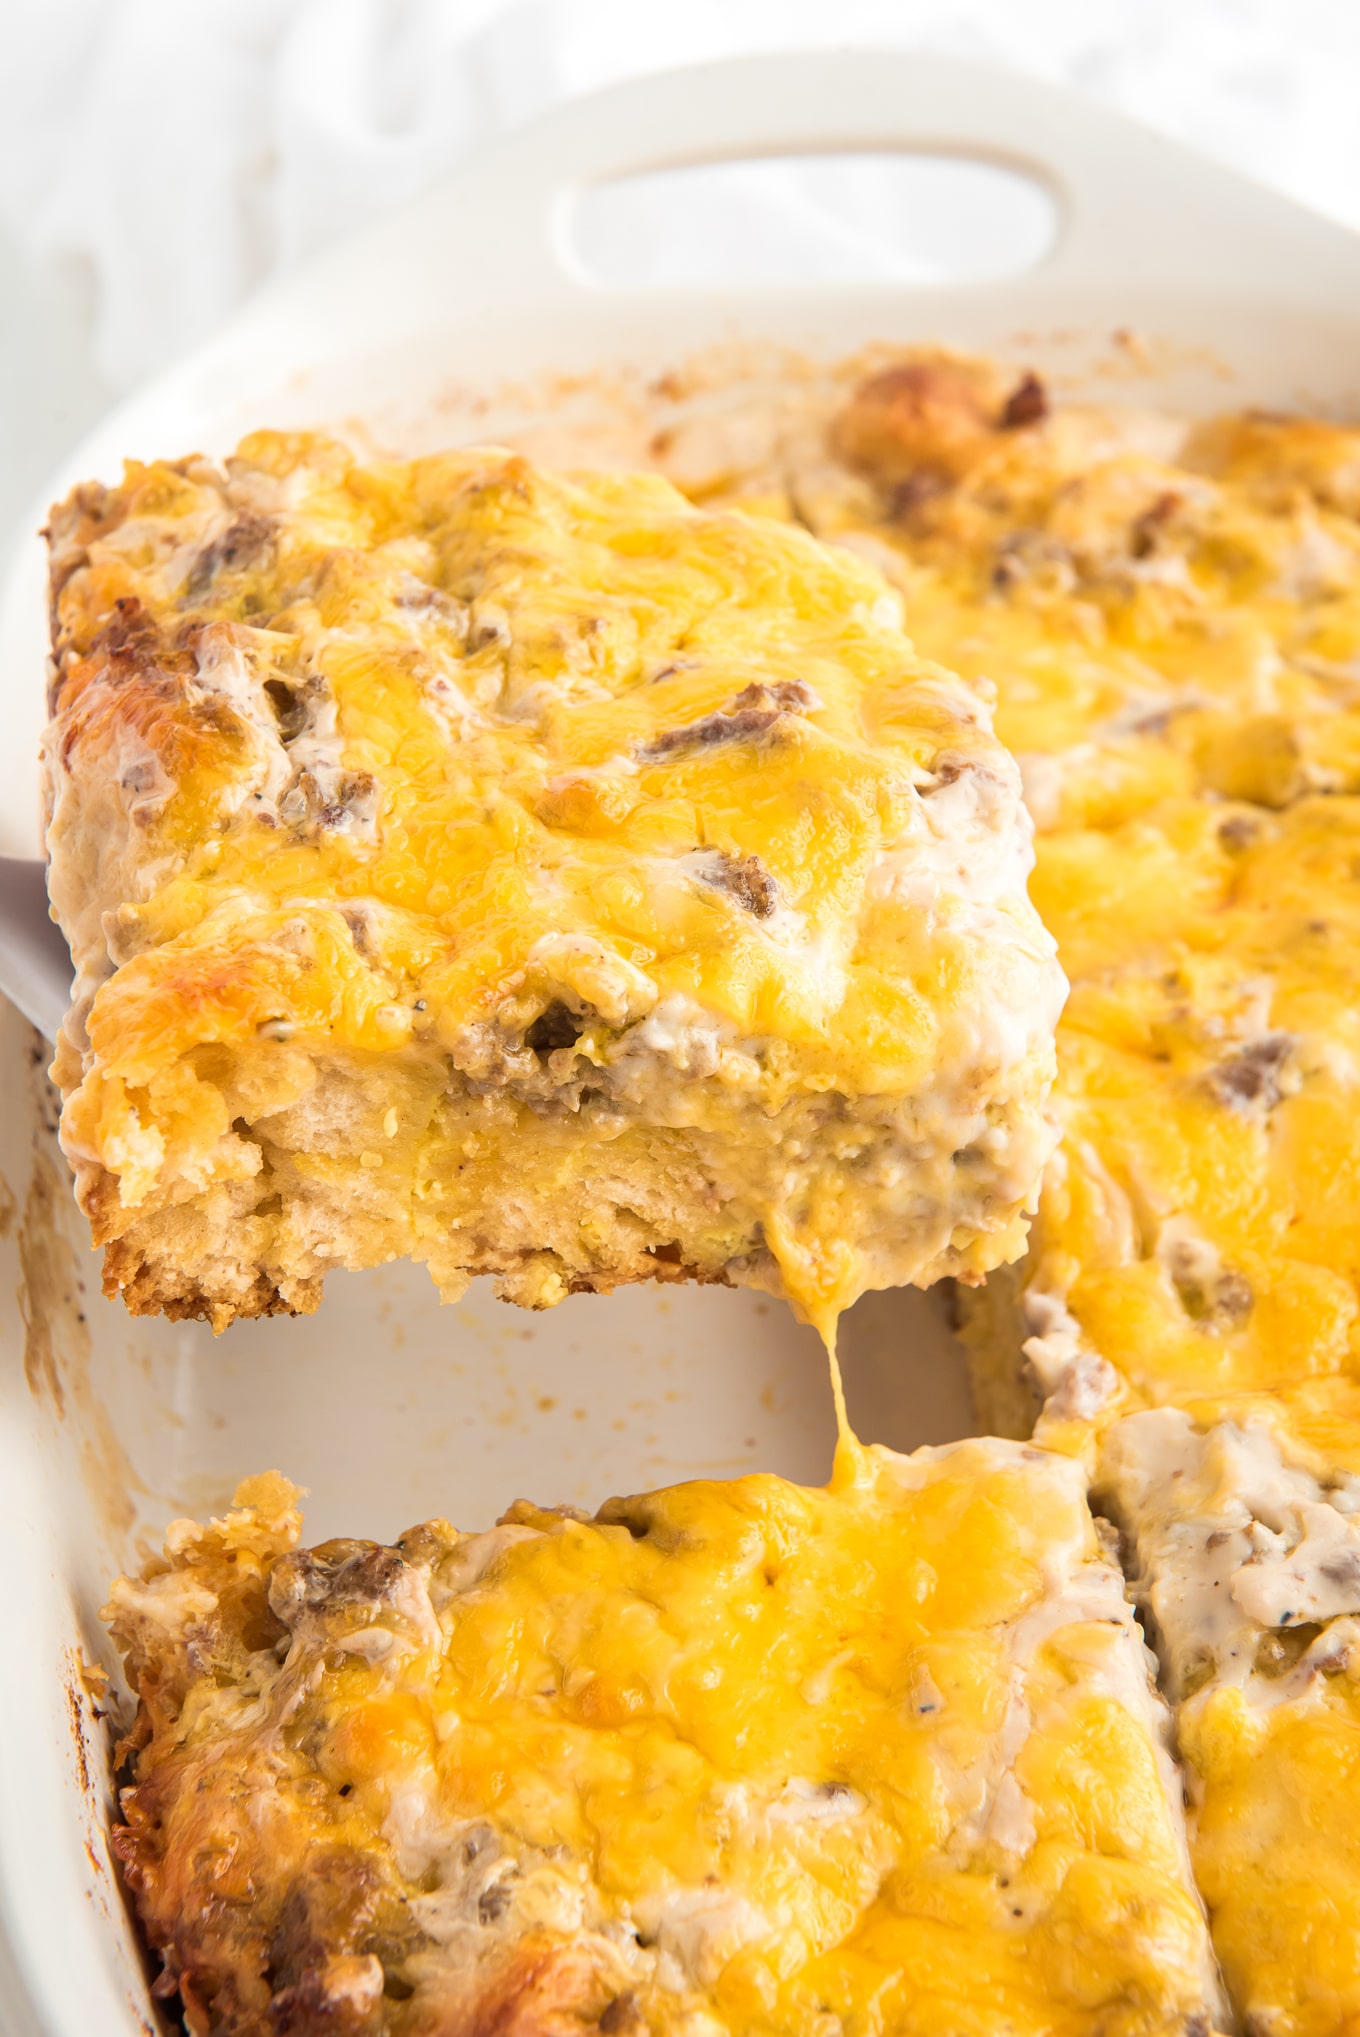 A spatula lifting out a square of easy breakfast casserole from the pan to serve.